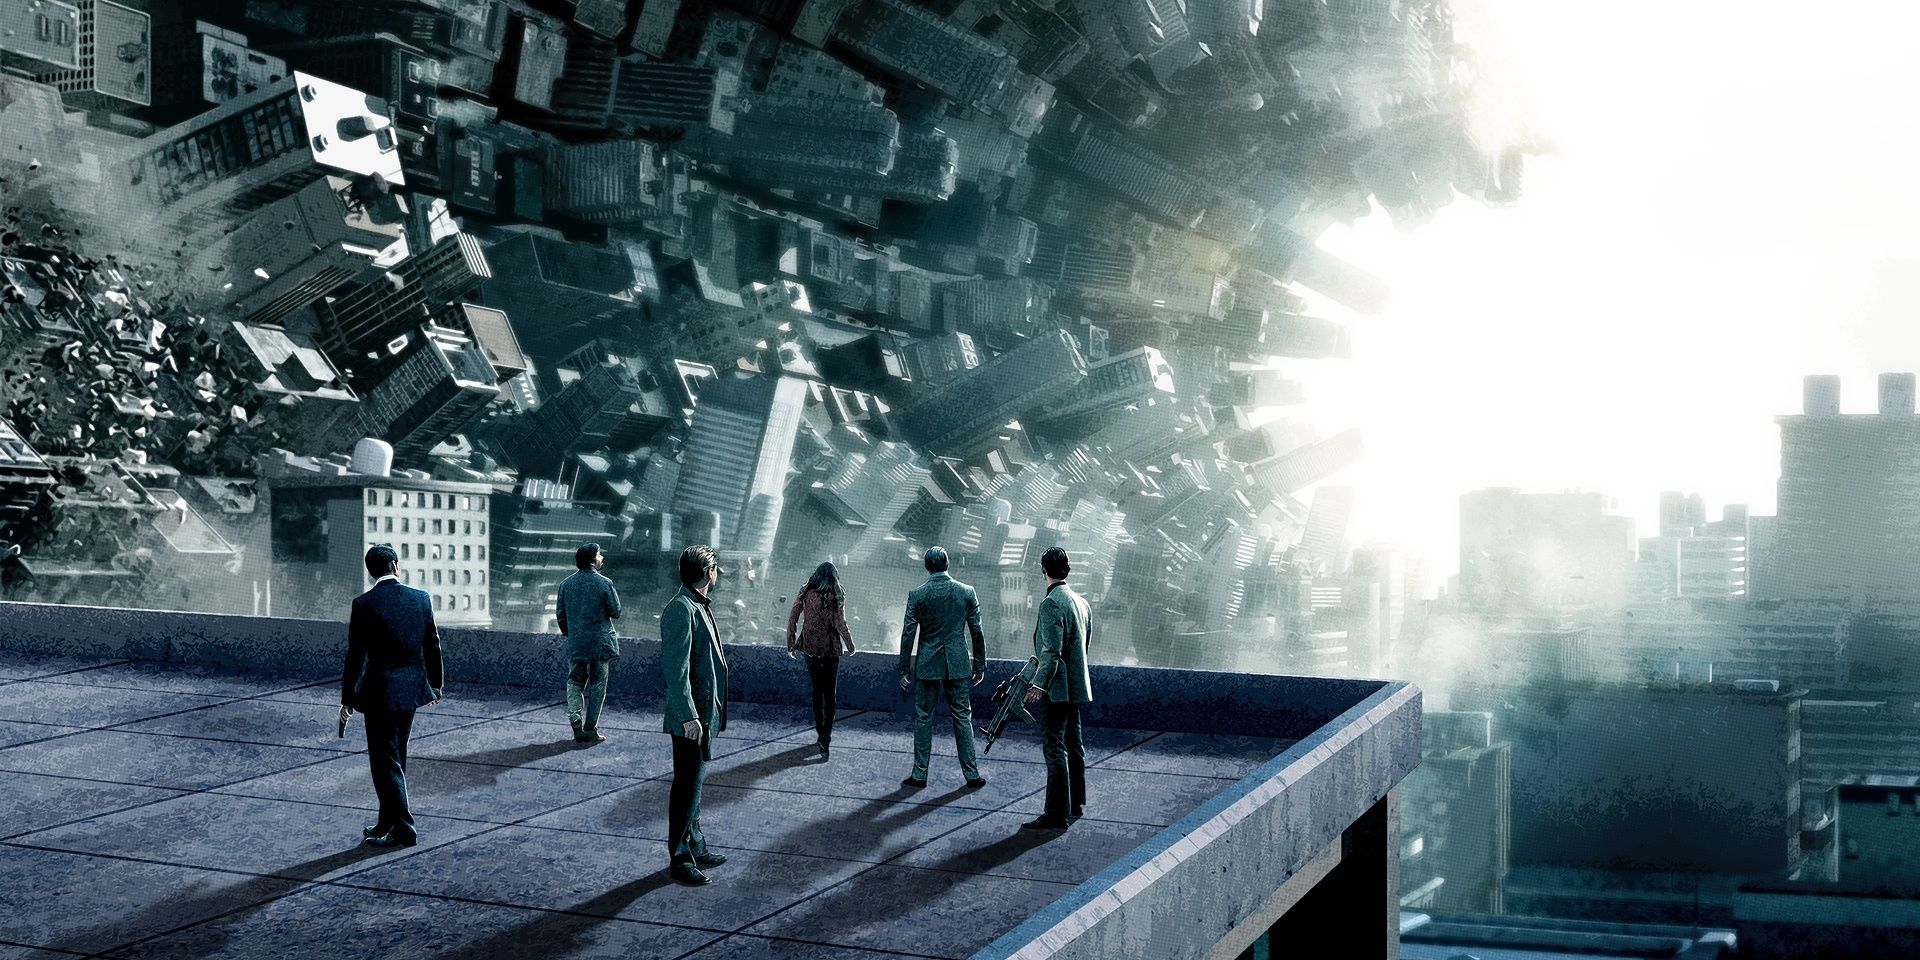 A city bends in on itself in this poster for Christopher Nolan's film Inception, starring Leonardo DiCaprio